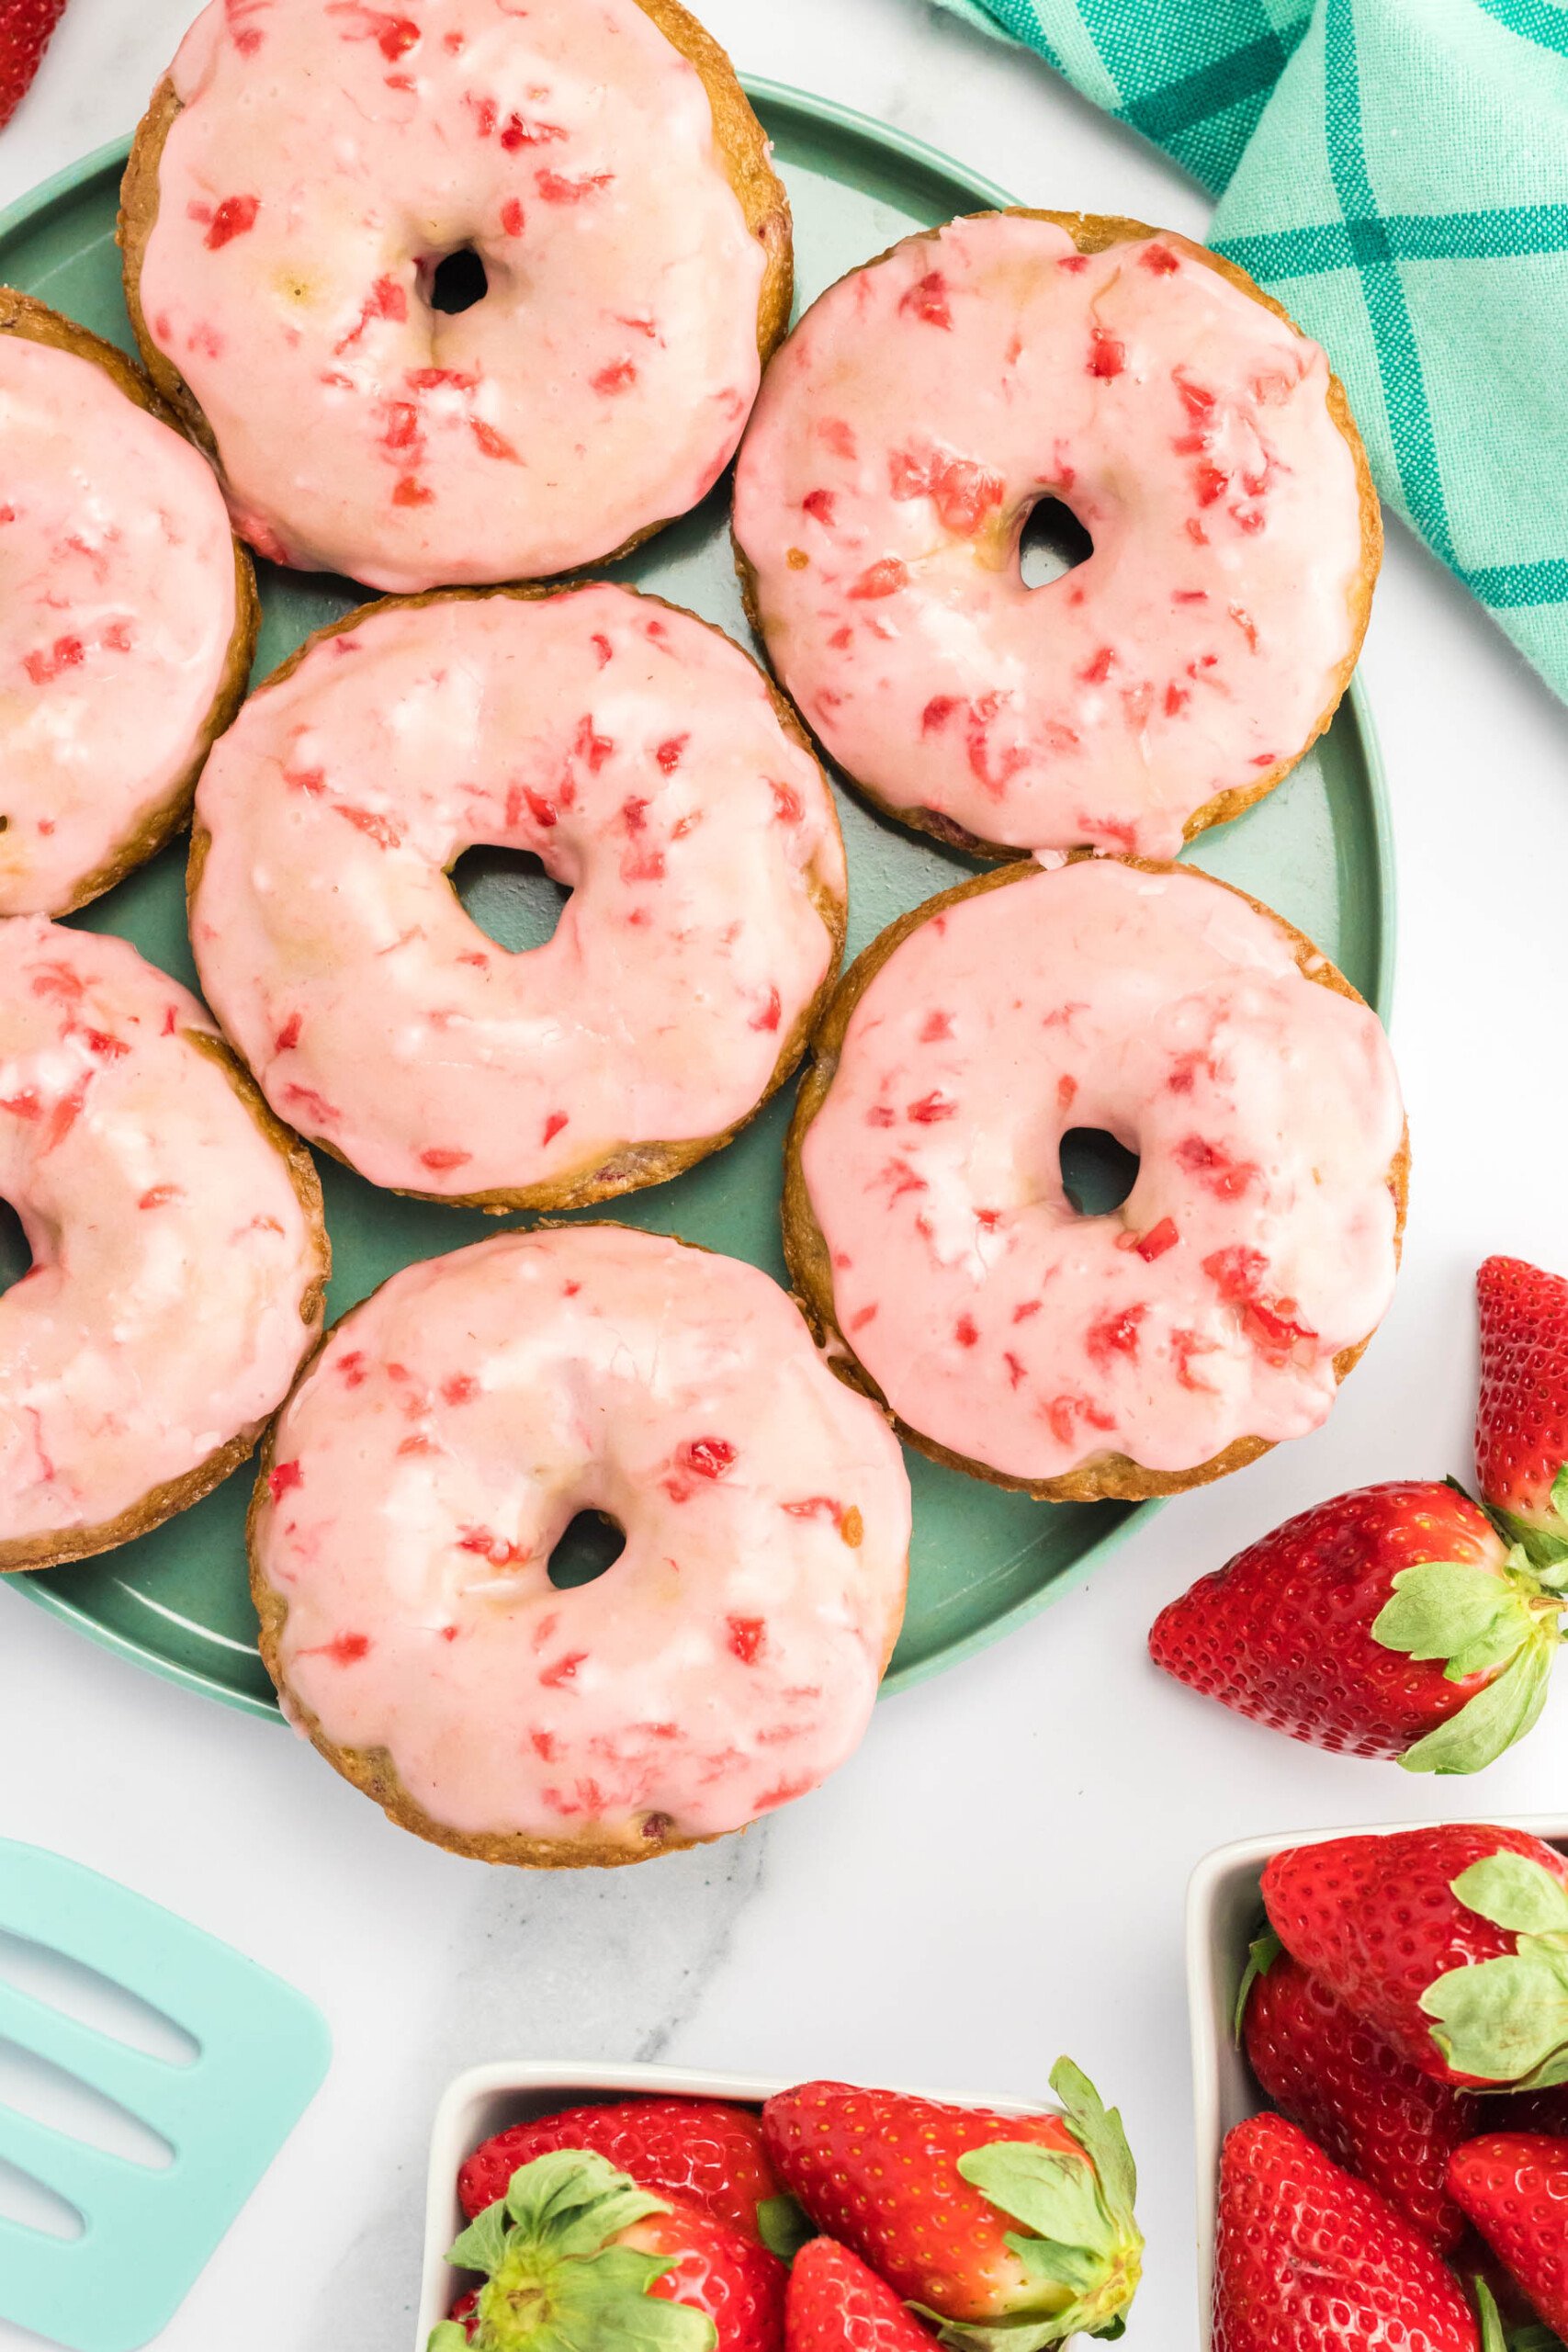 Top view of baked strawberry donuts on a plate.